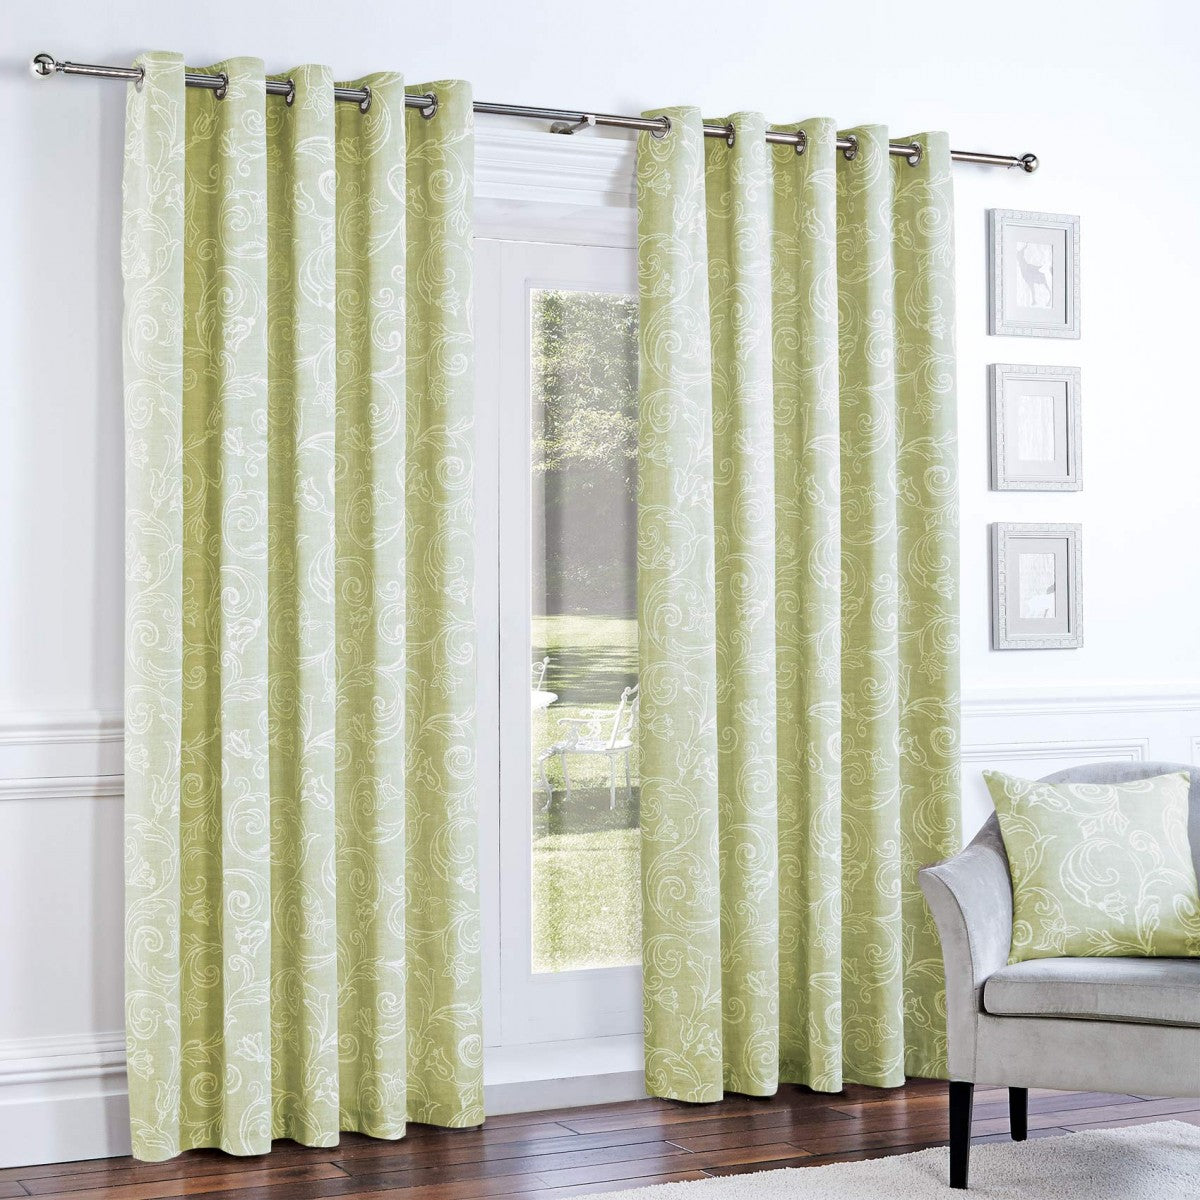 Curtina Somerford Lined Eyelet Curtains - Green